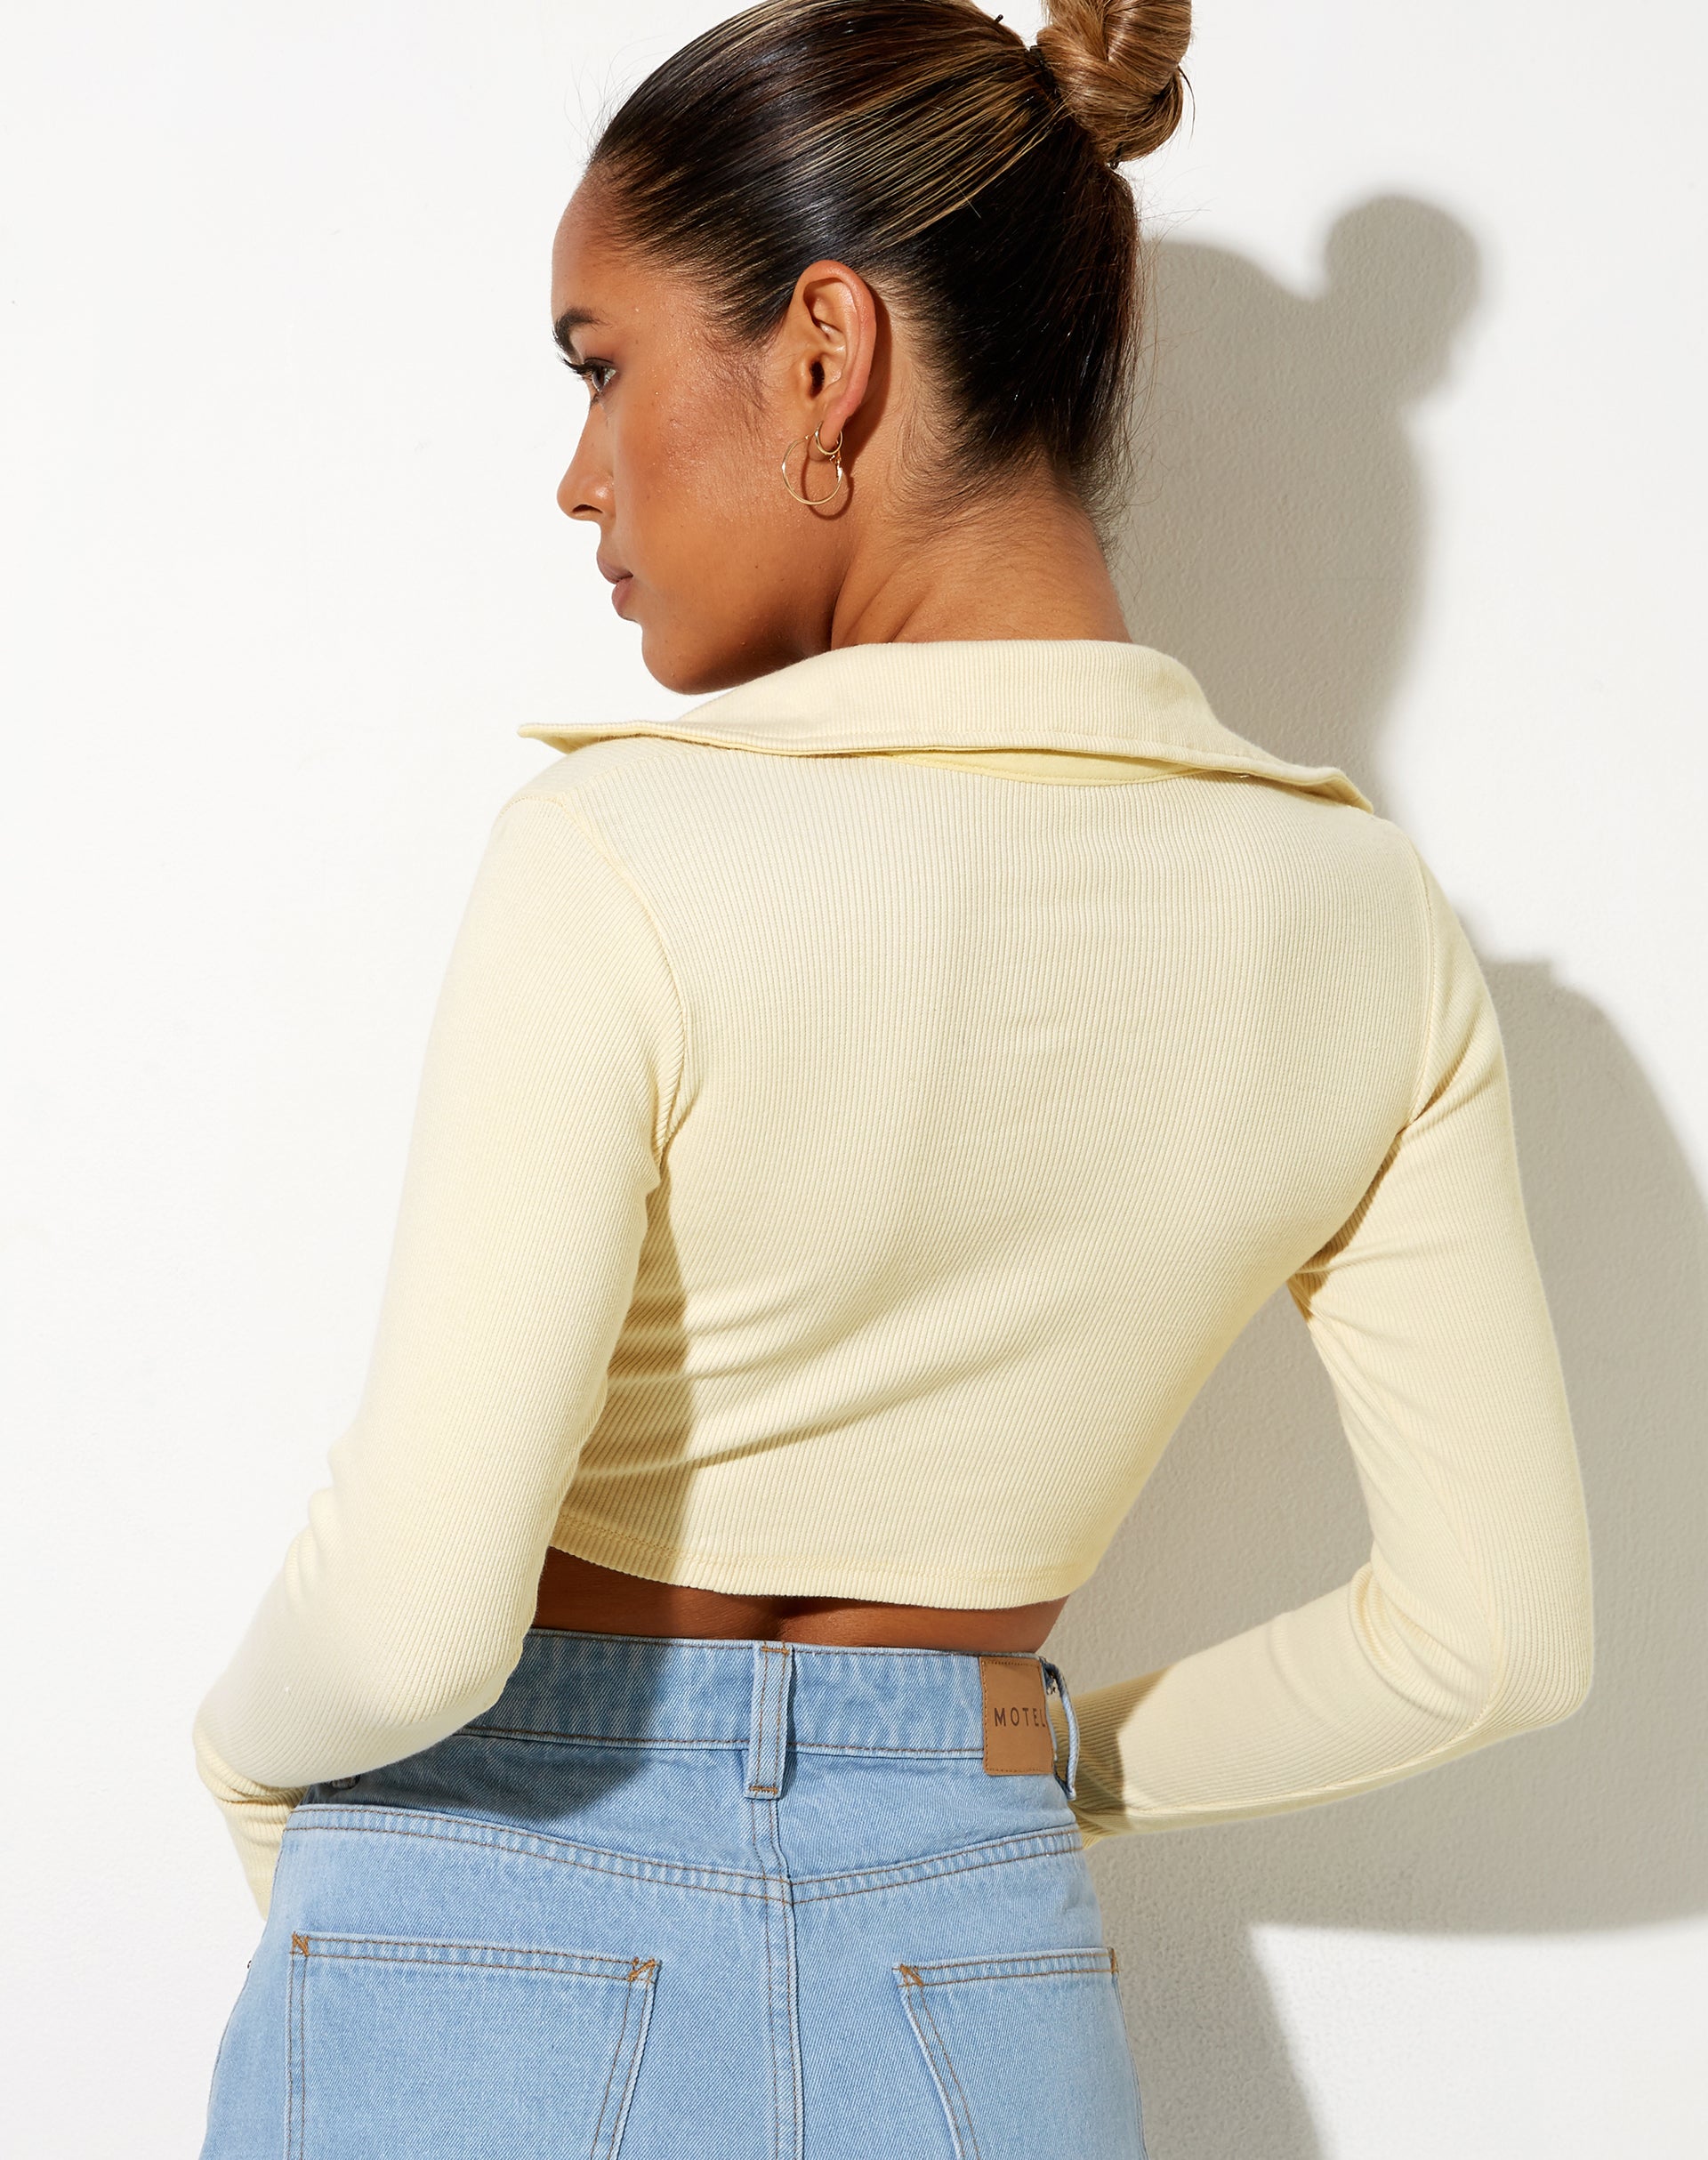 Image of Elody Crop Top in Buttercream Vacay Embro